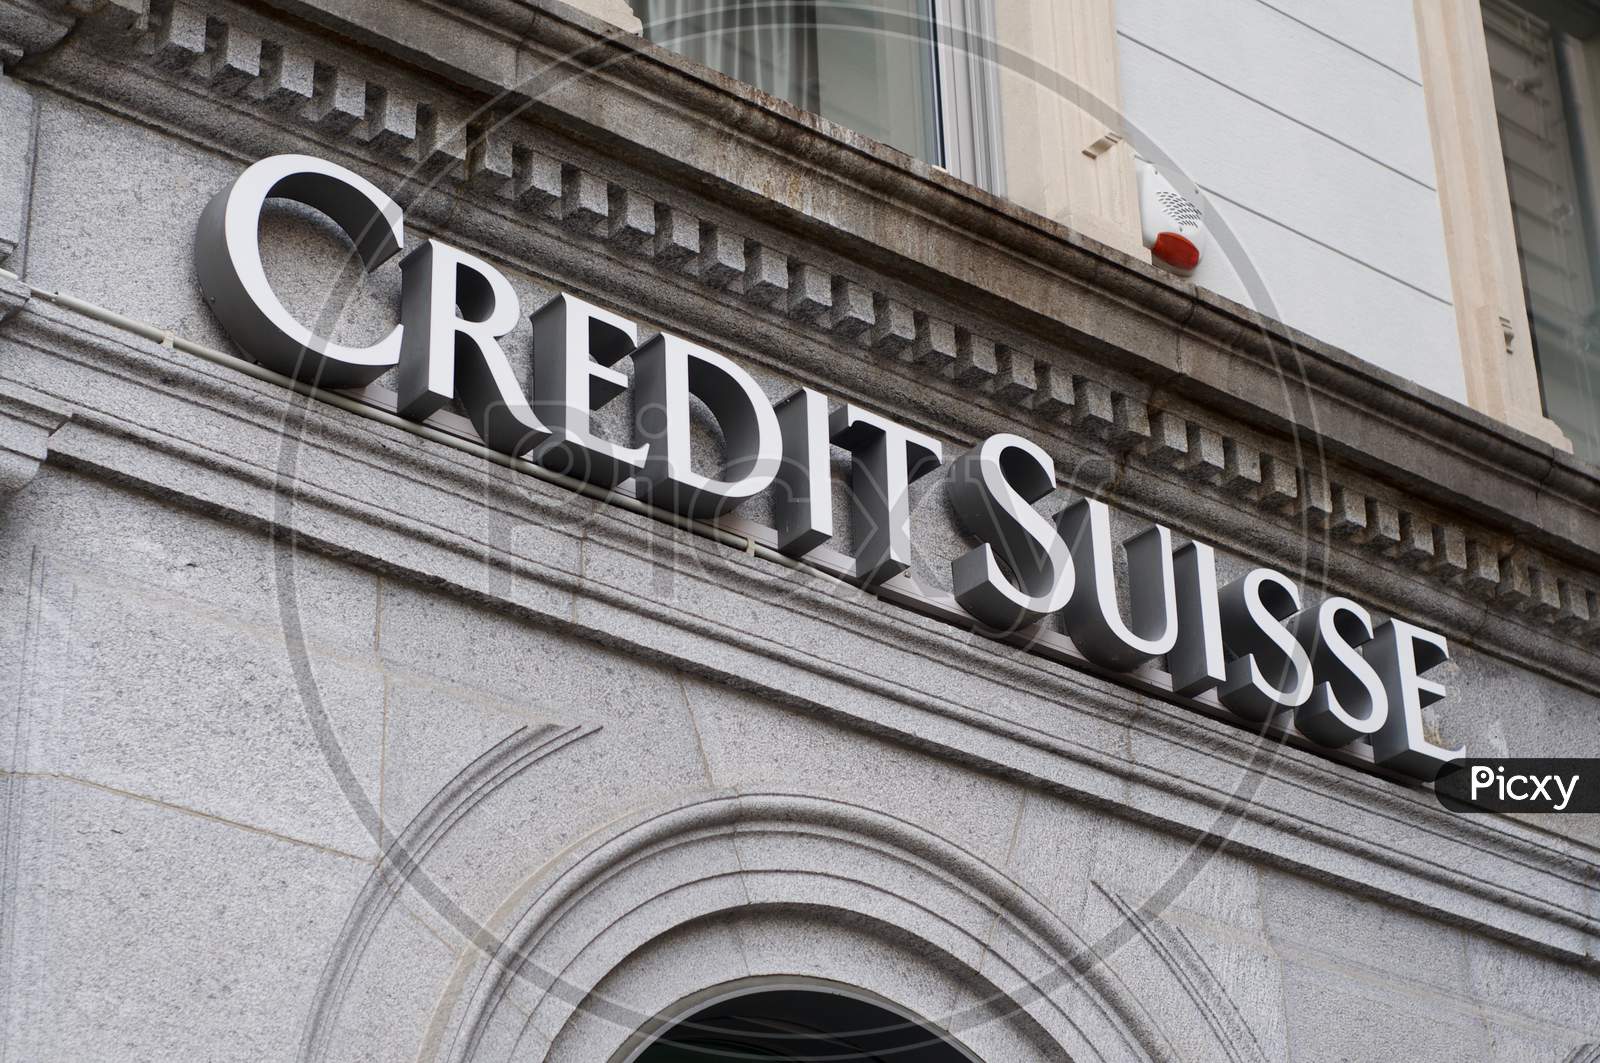 Credit Suisse Bank Sign Hanging On A Old Building Facade